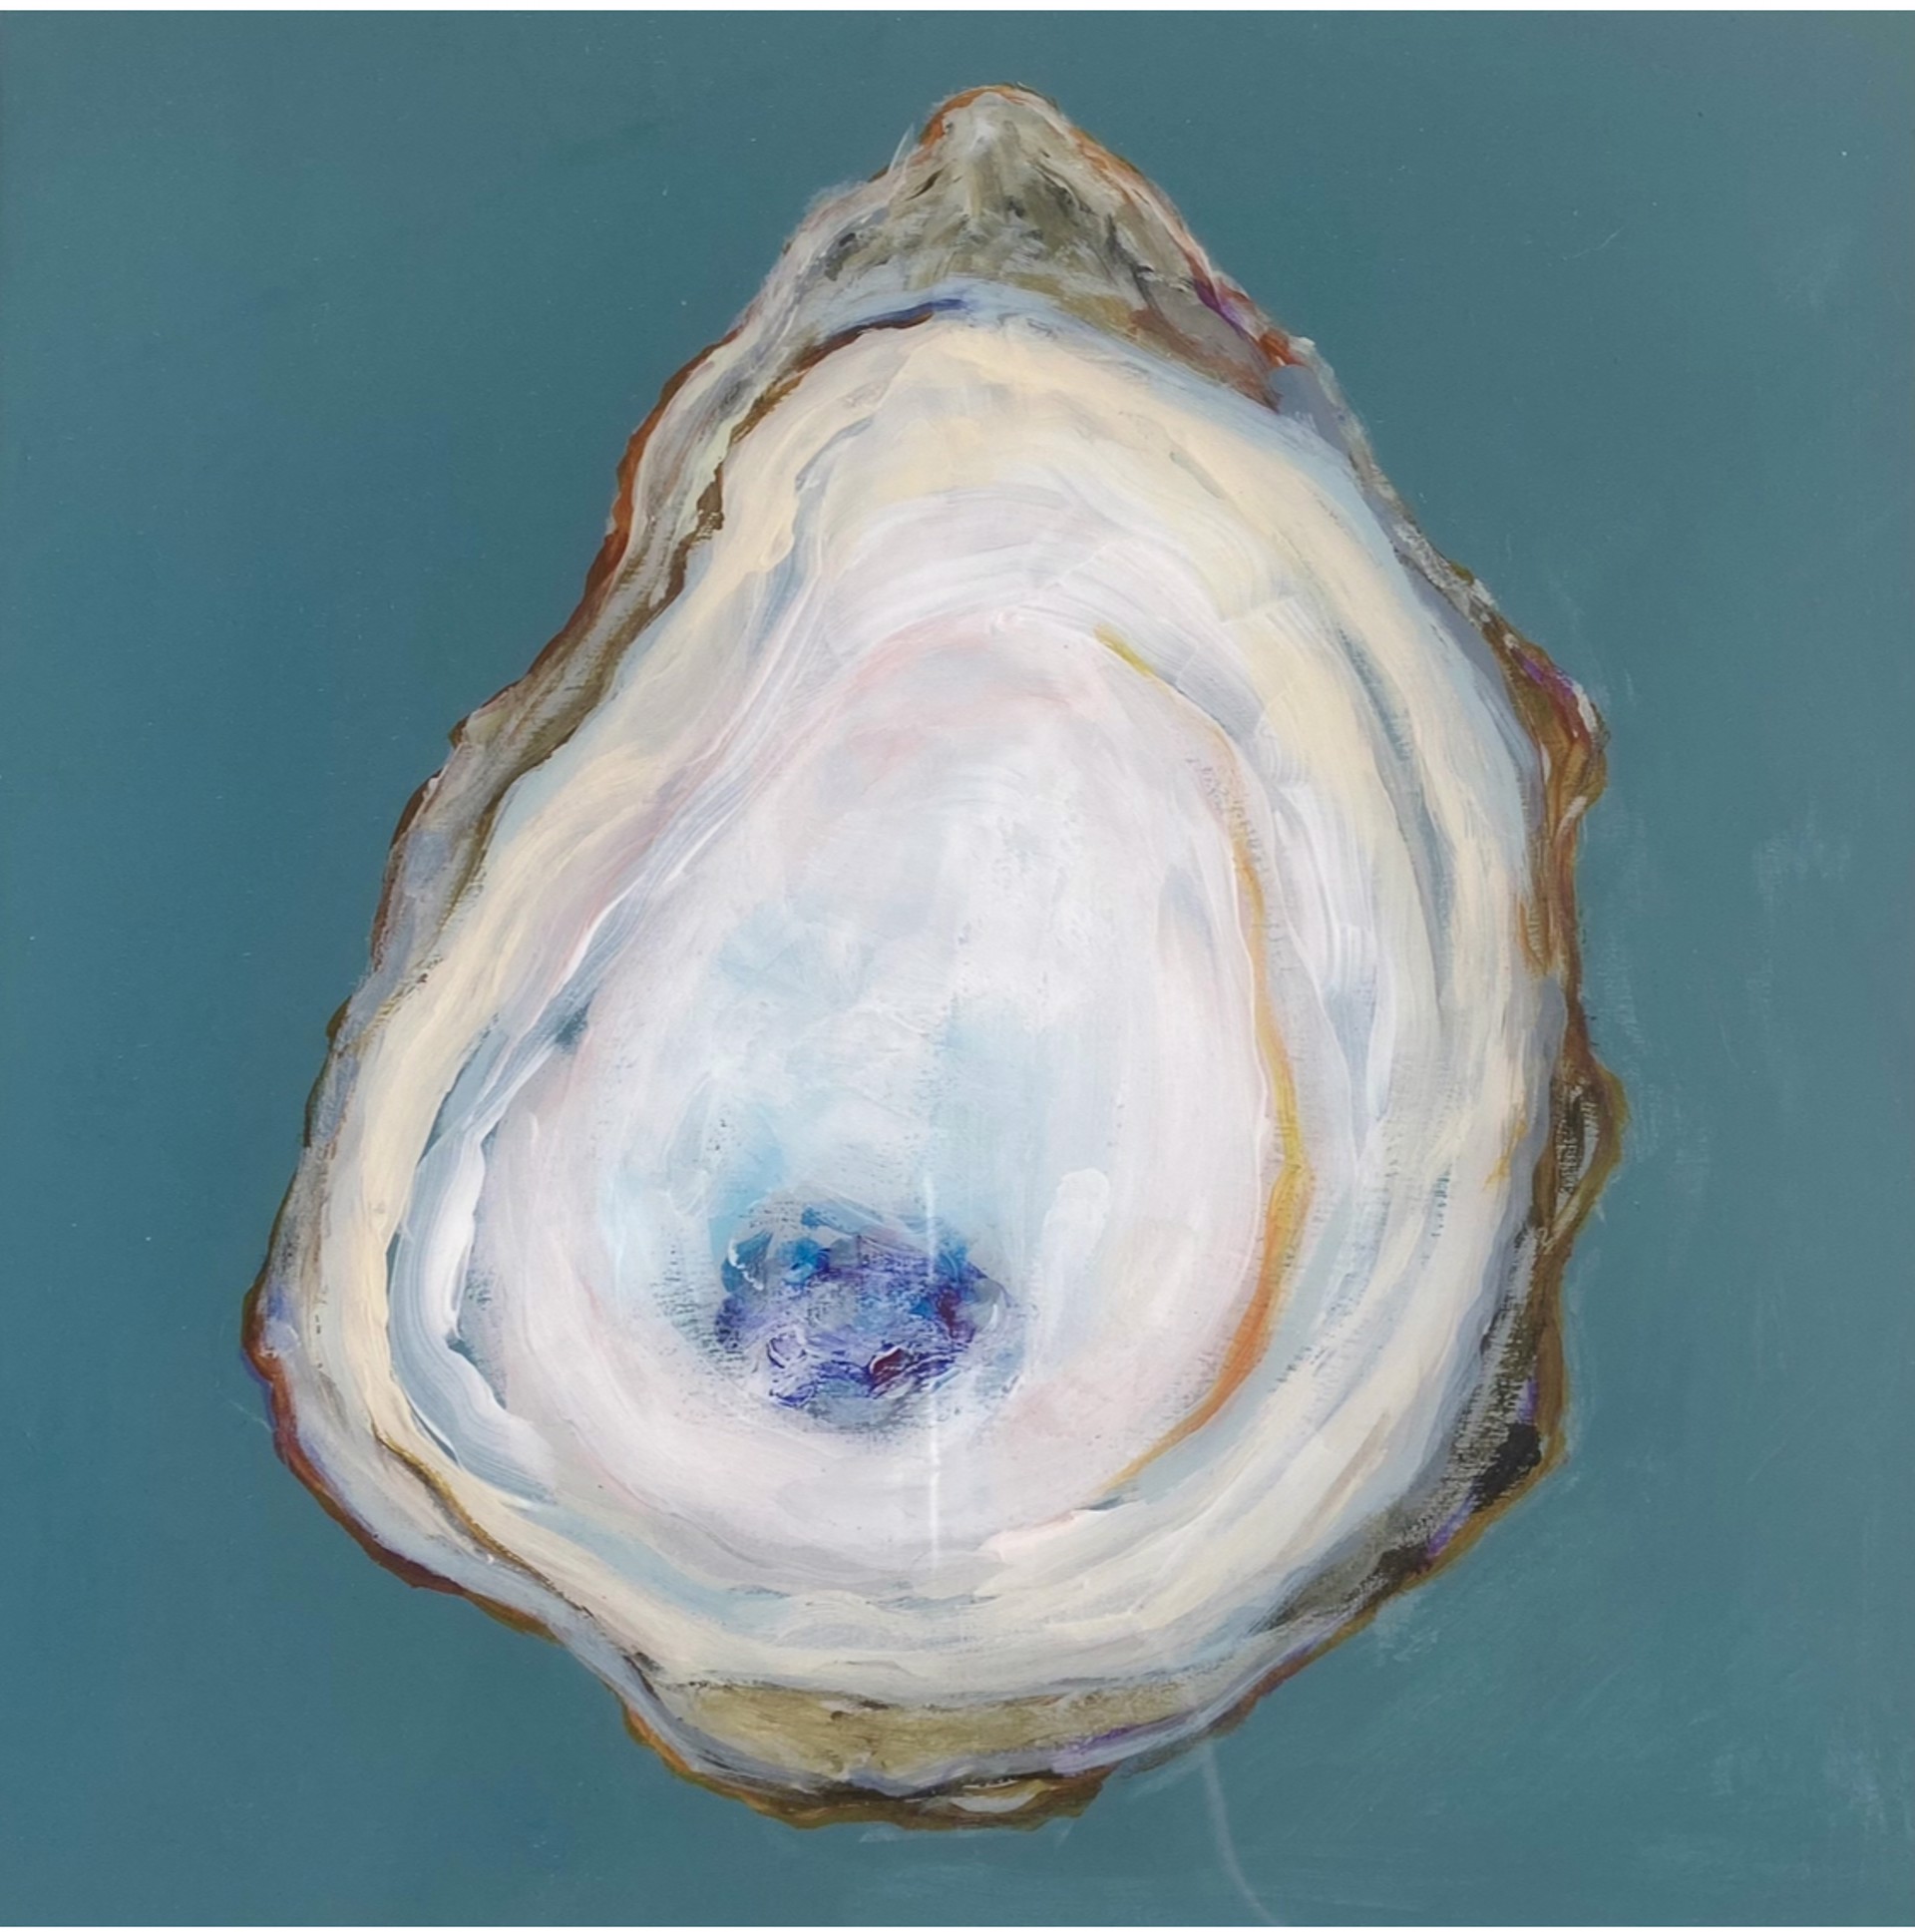 The Great Oyster by Anne Harney